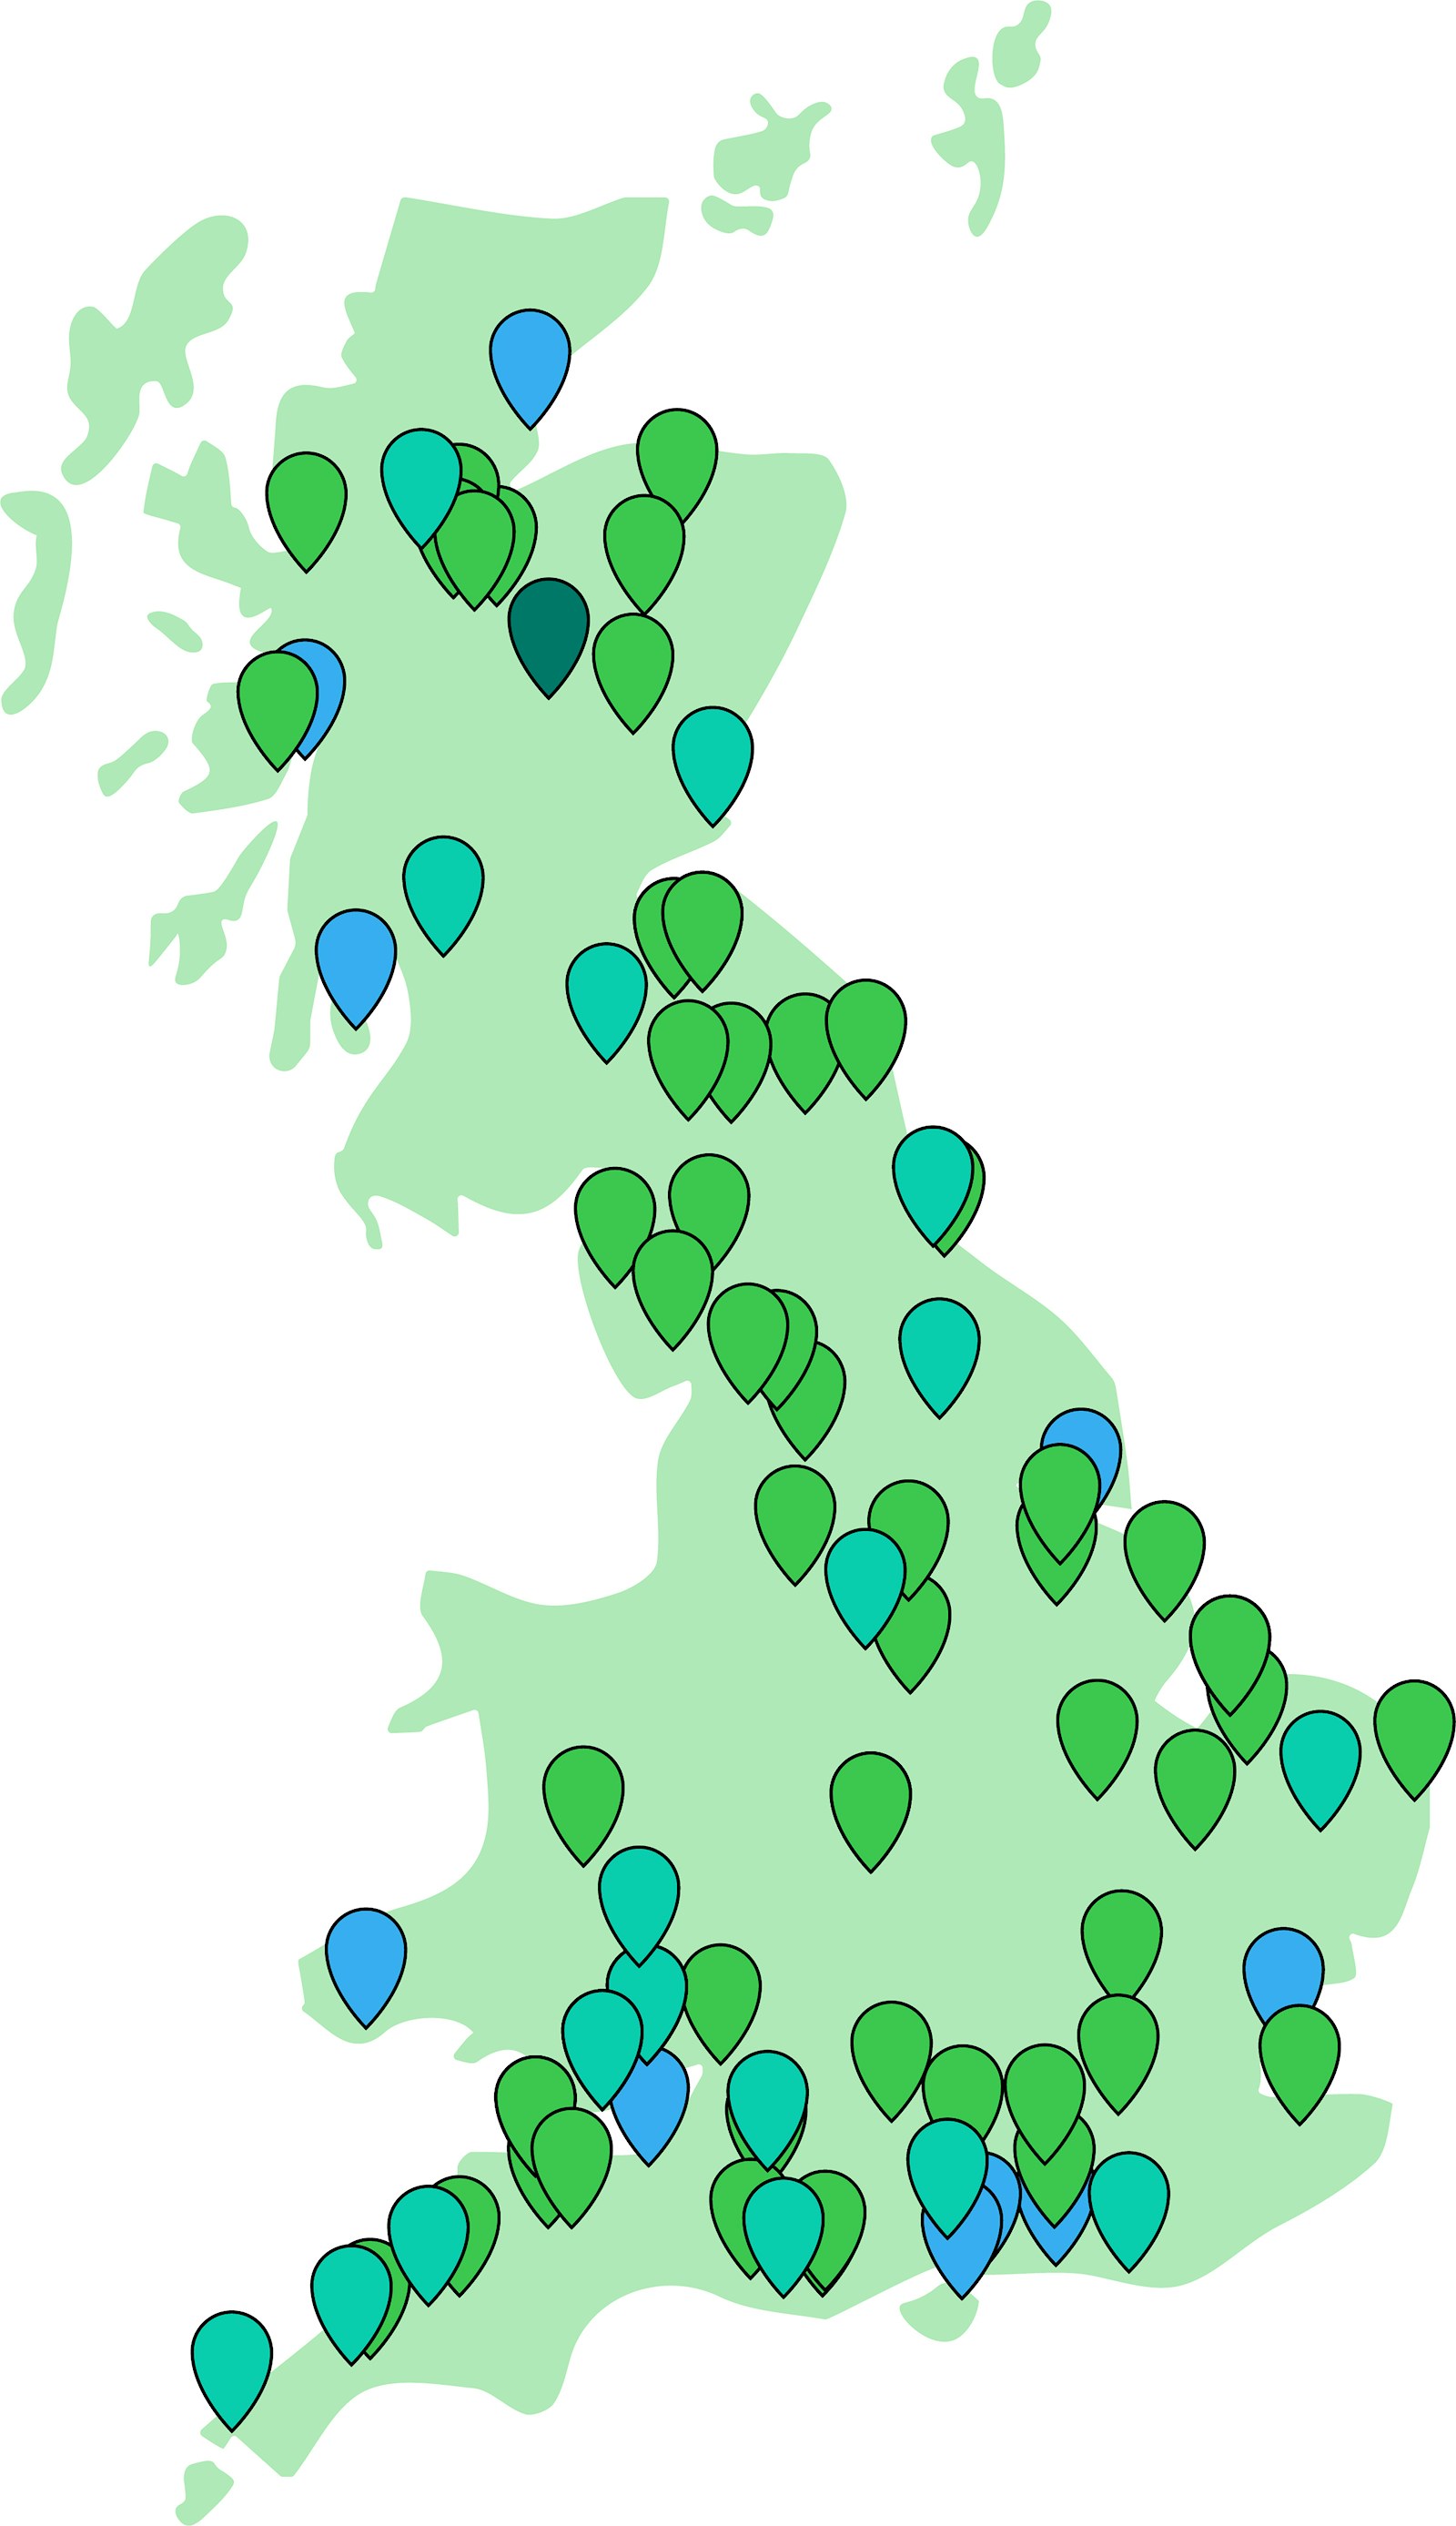 A map of Britain marked with pins to indicate the locations of members within the Rewilding Network